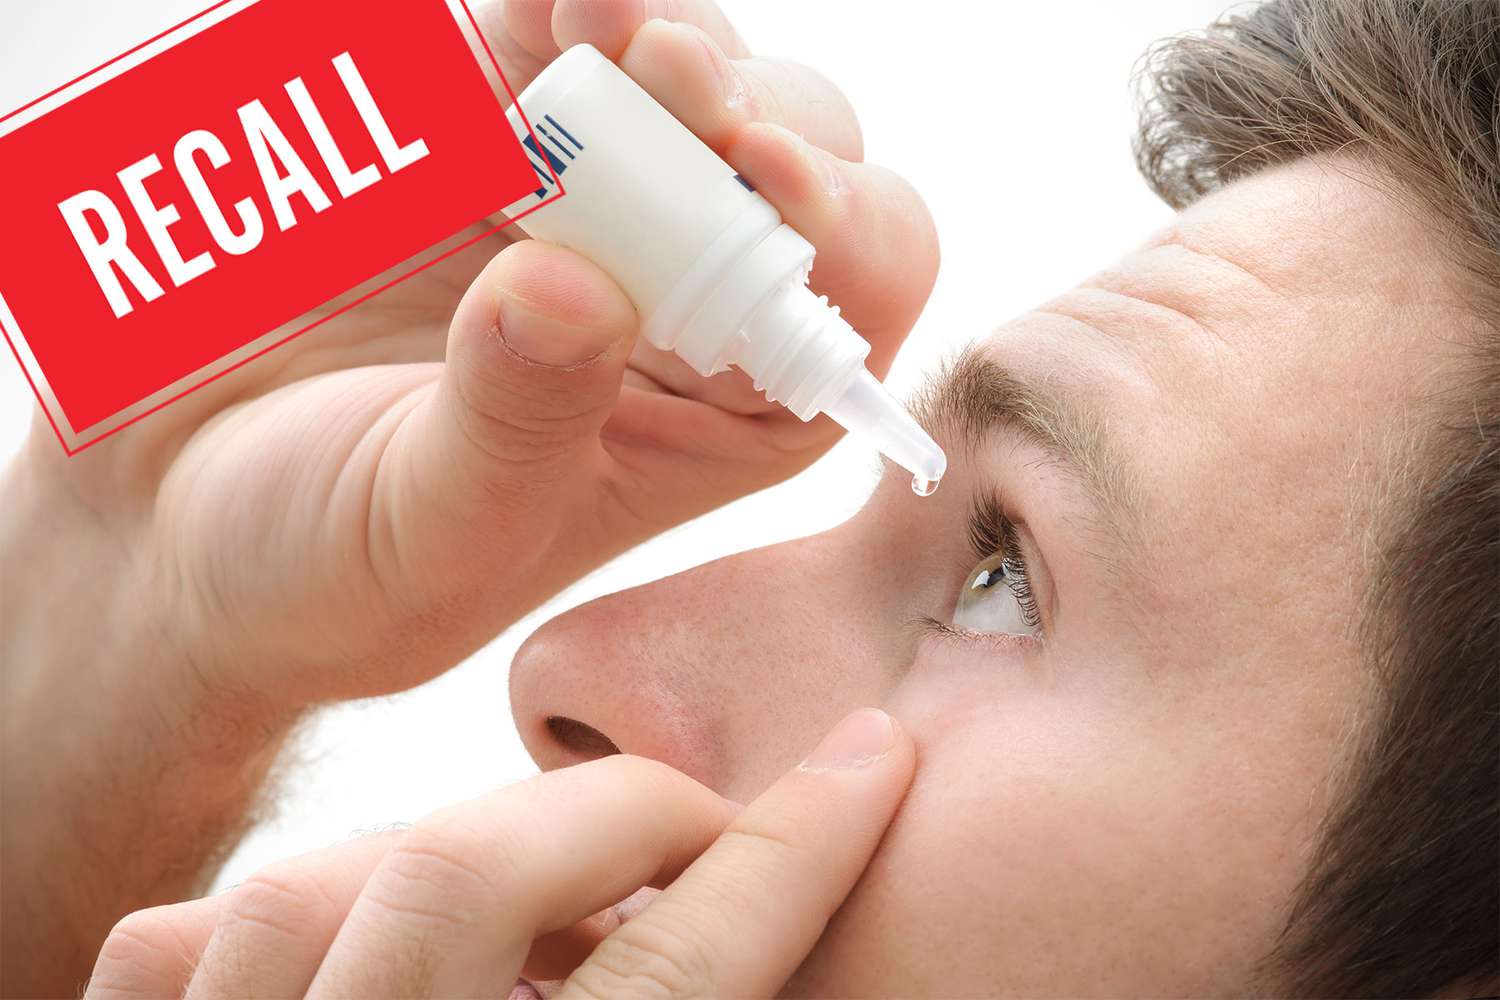 FDA Orders Massive Recall on Eye Drops Over Bacterial Contamination